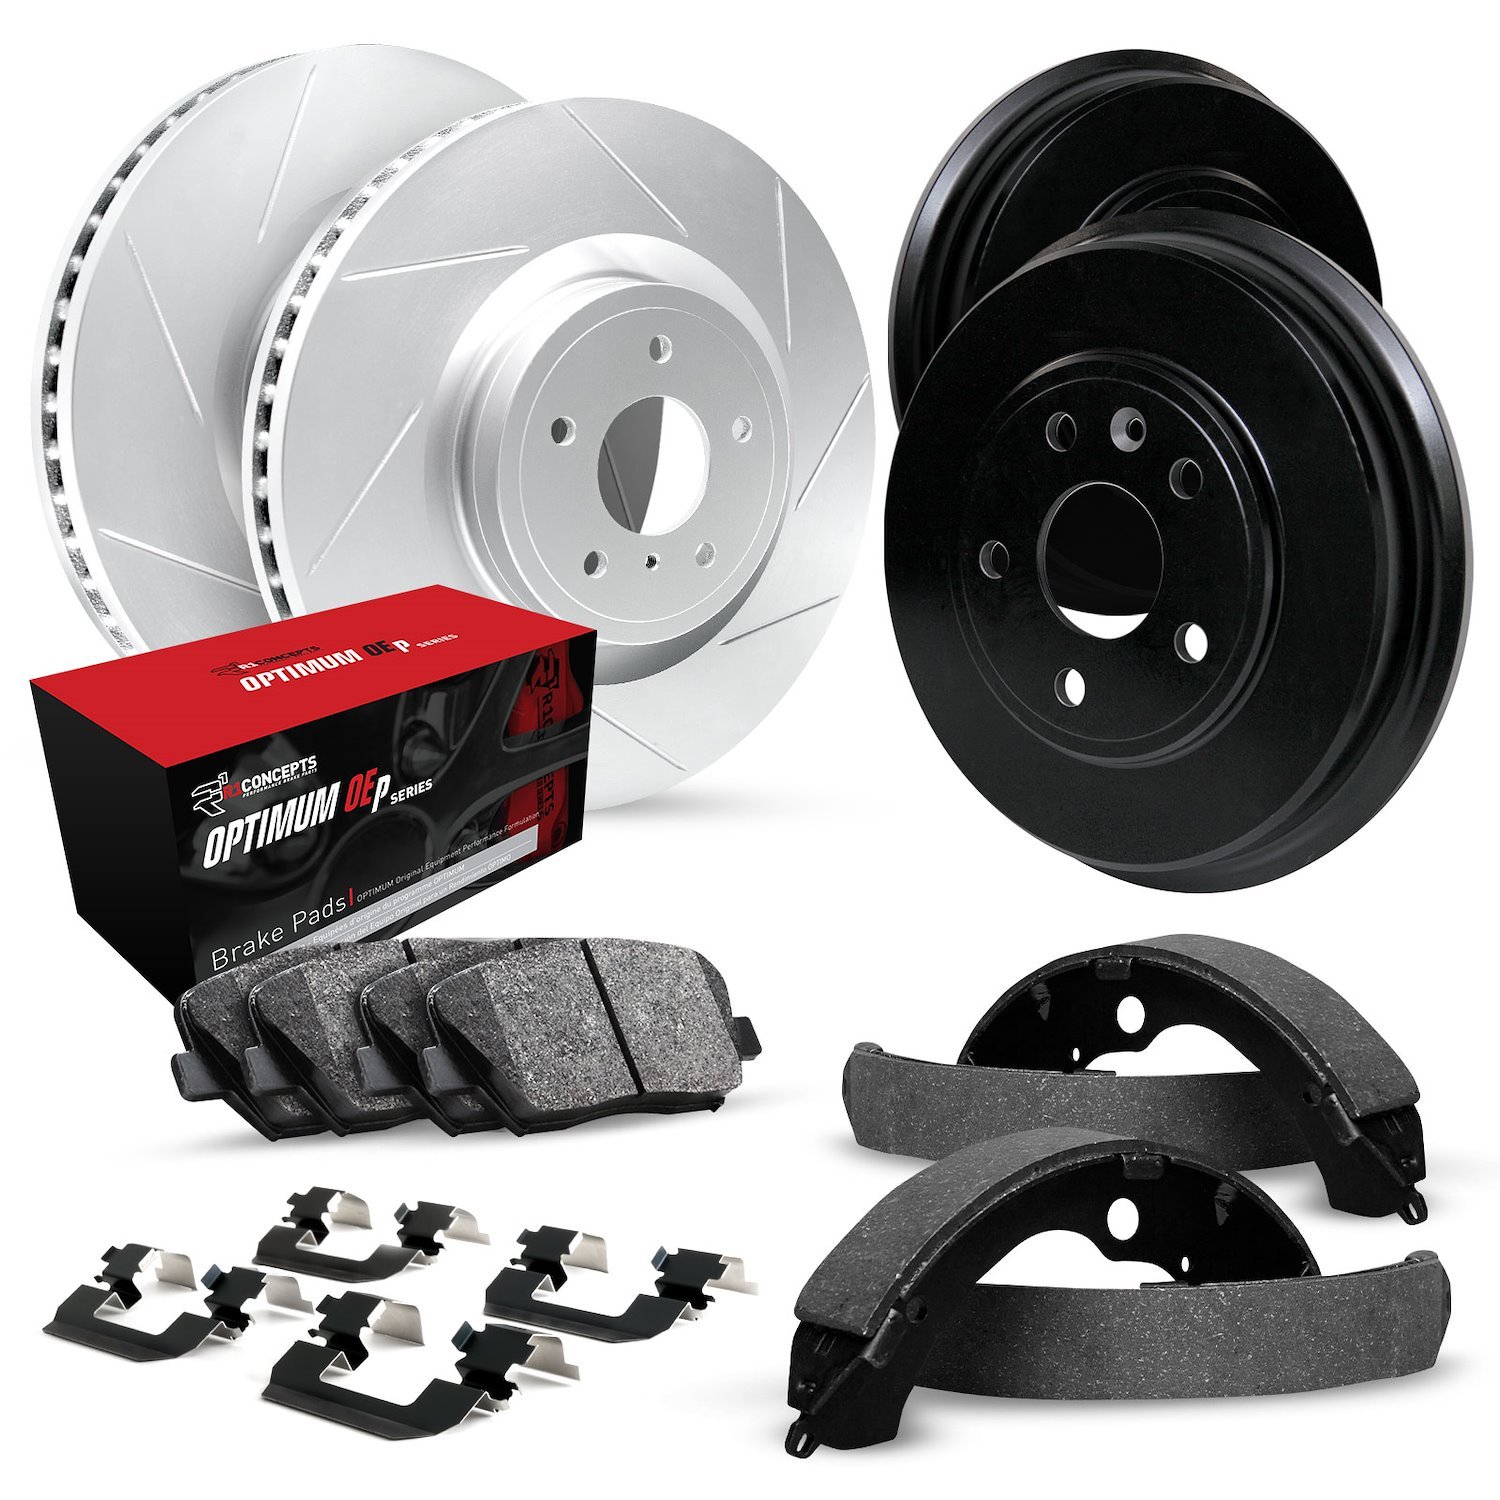 GEO-Carbon Slotted Brake Rotor & Drum Set w/Optimum OE Pads, Shoes, & Hardware, 1994-1997 GM, Position: Front & Rear